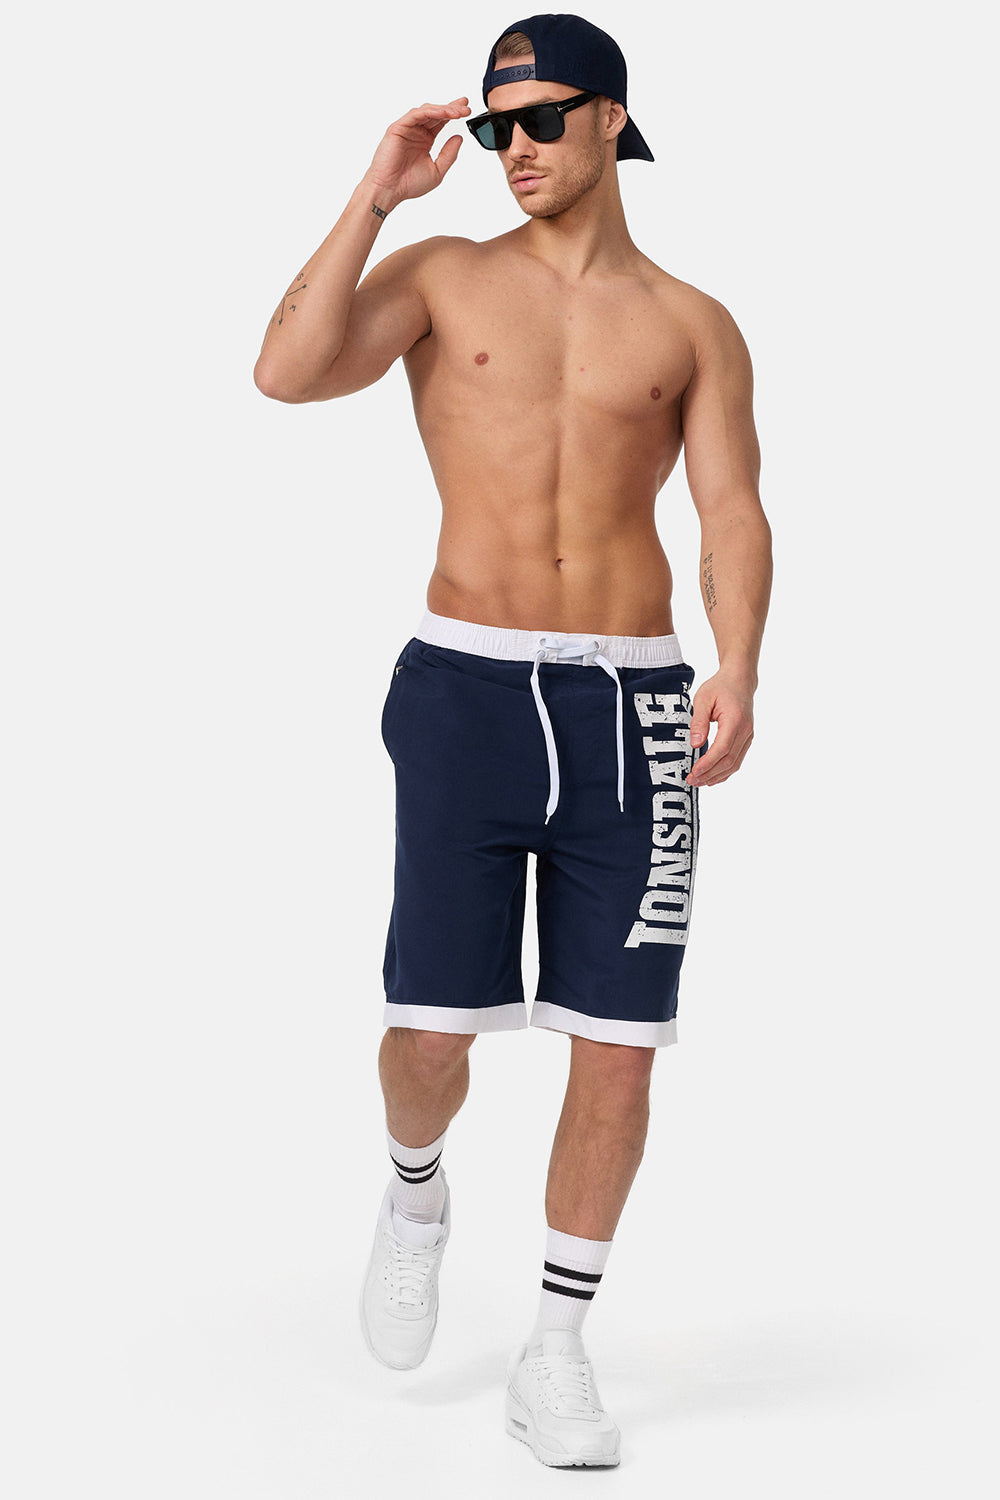 Lonsdale Badehose Clennell Blue White